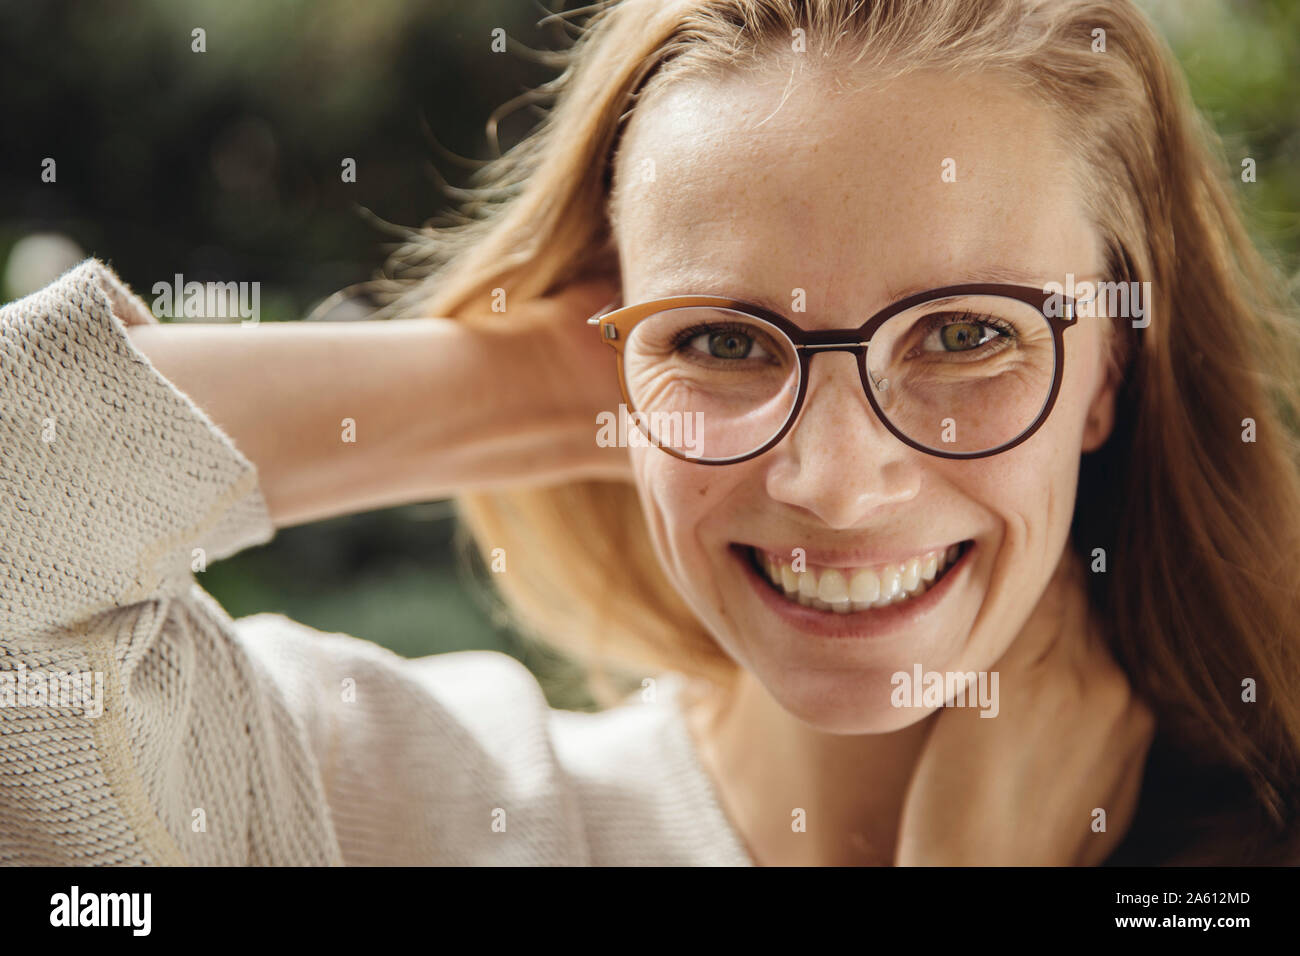 Portrait of happy young woman with glasses Banque D'Images